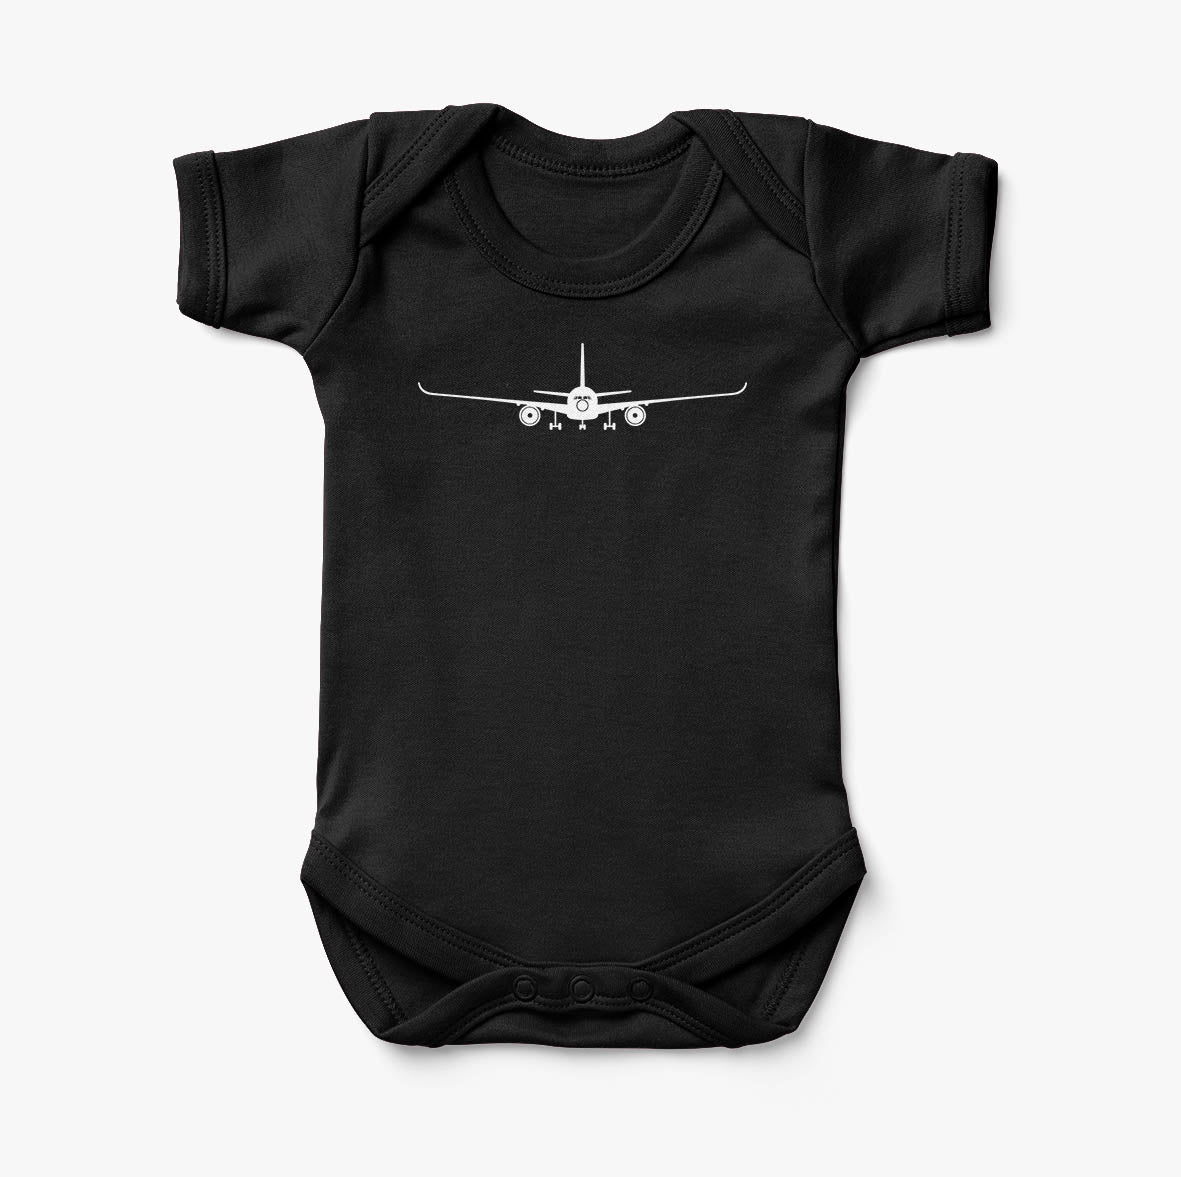 Airbus A350 Silhouette Designed Baby Bodysuits